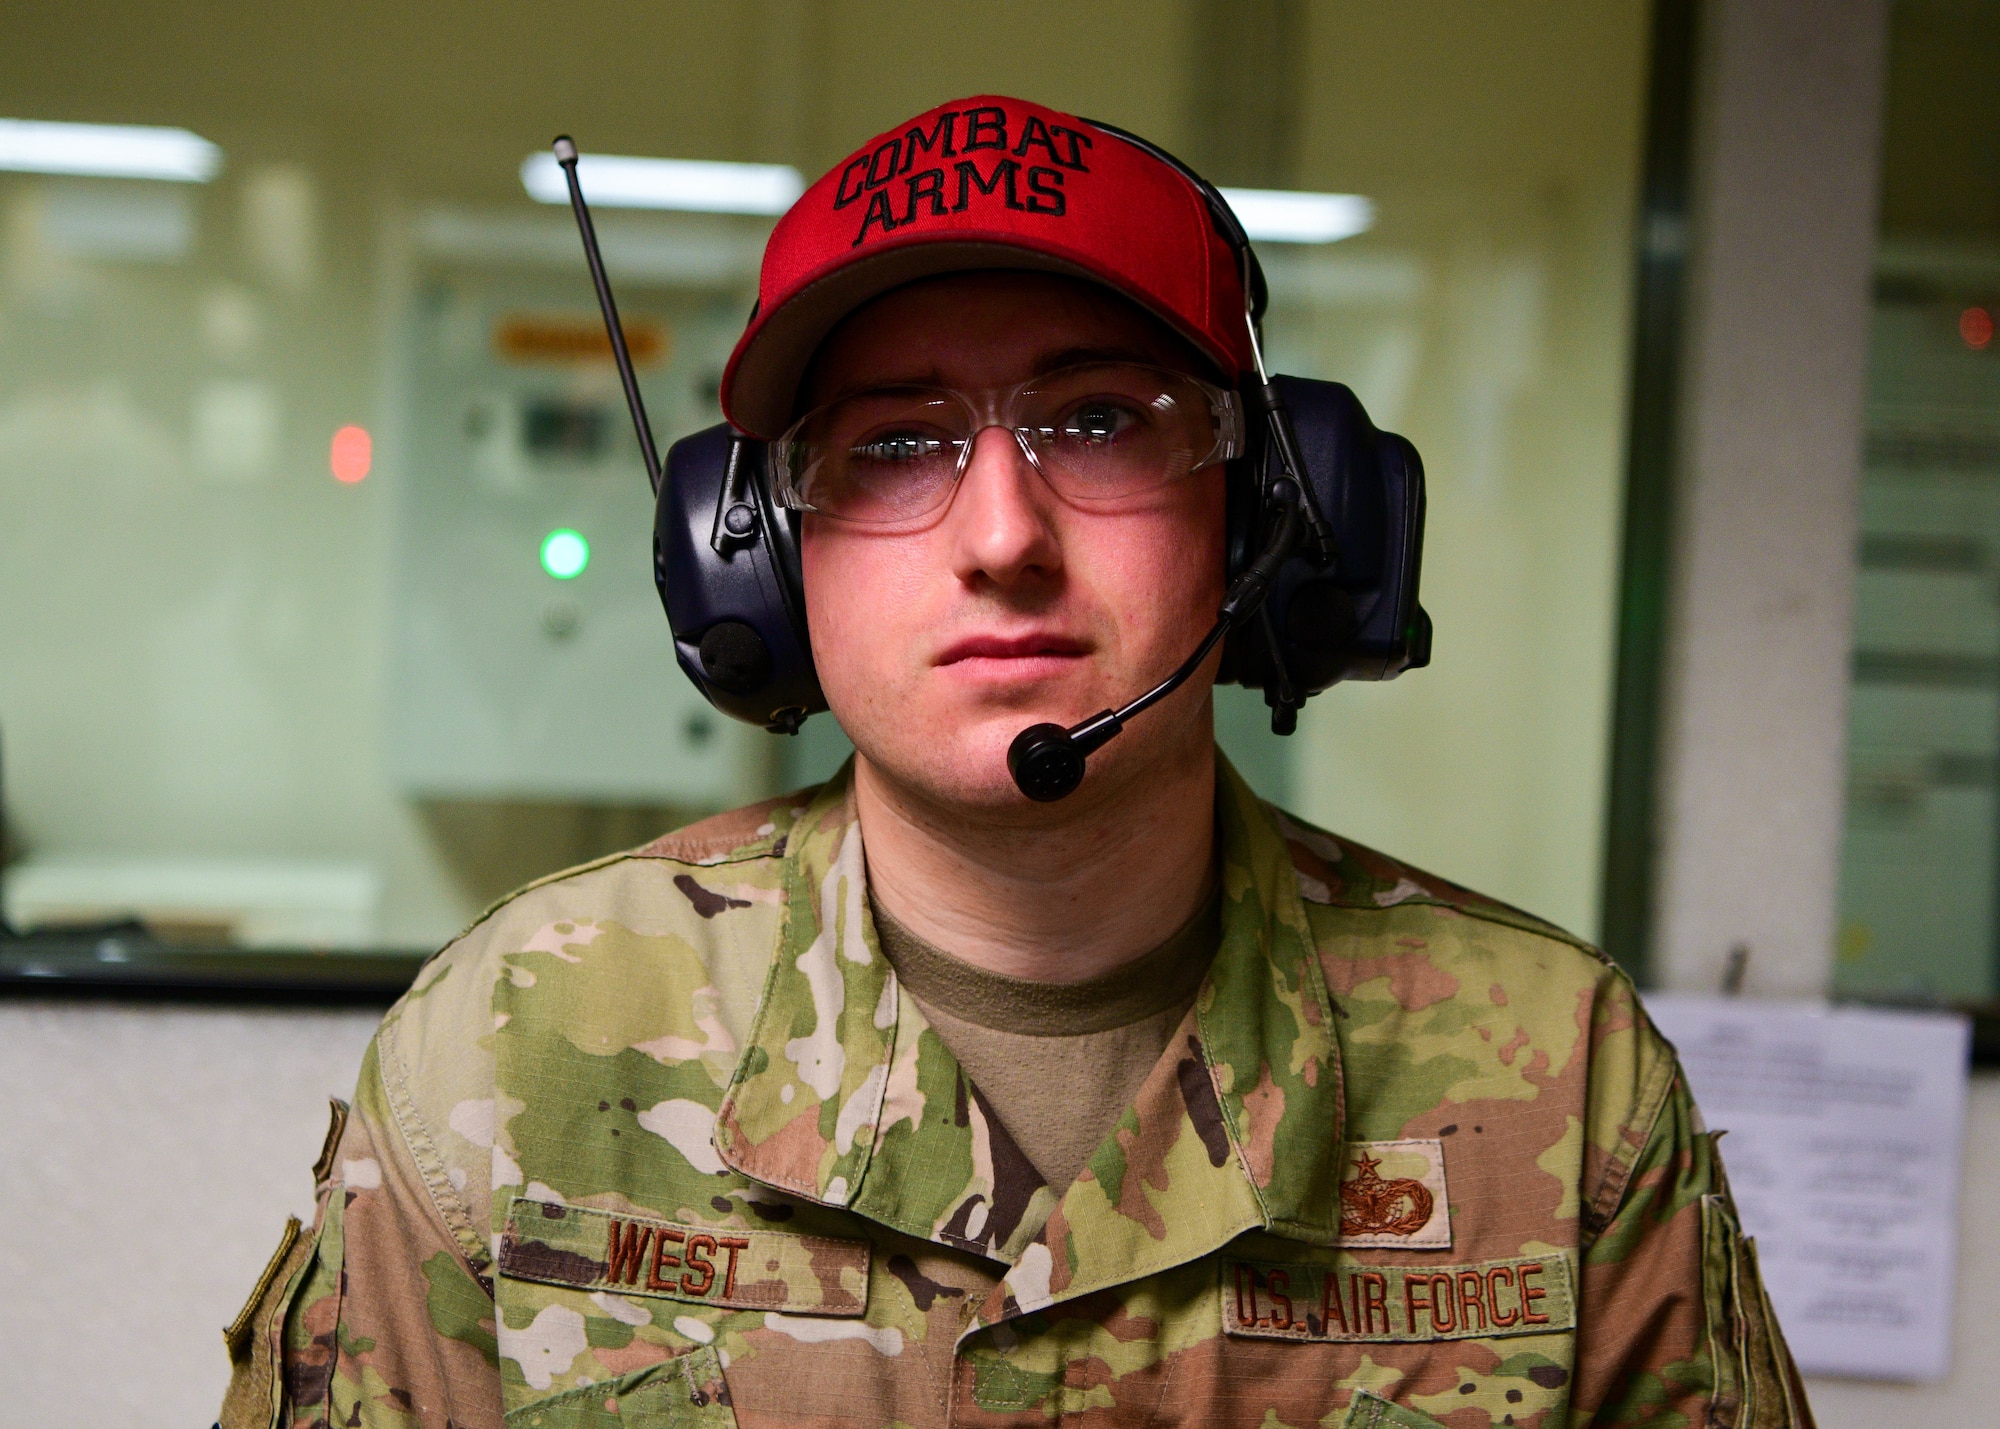 U.S. Air Force Staff Sgt. Ryan West, 31st Security Forces Squadron combat arms instructor, supervises individuals participating in the 2022 Excellence in Competition Pistol match at Aviano Air Base, Italy, May 17, 2022. Participants were graded on accuracy during the competition held in honor of Police Week. In 1962, President Kennedy declared Peace Officers Memorial Day to be observed on May 15 and recognized May 15 as National Police Week. (U.S Air Force photo by Senior Airman Brooke Moeder)